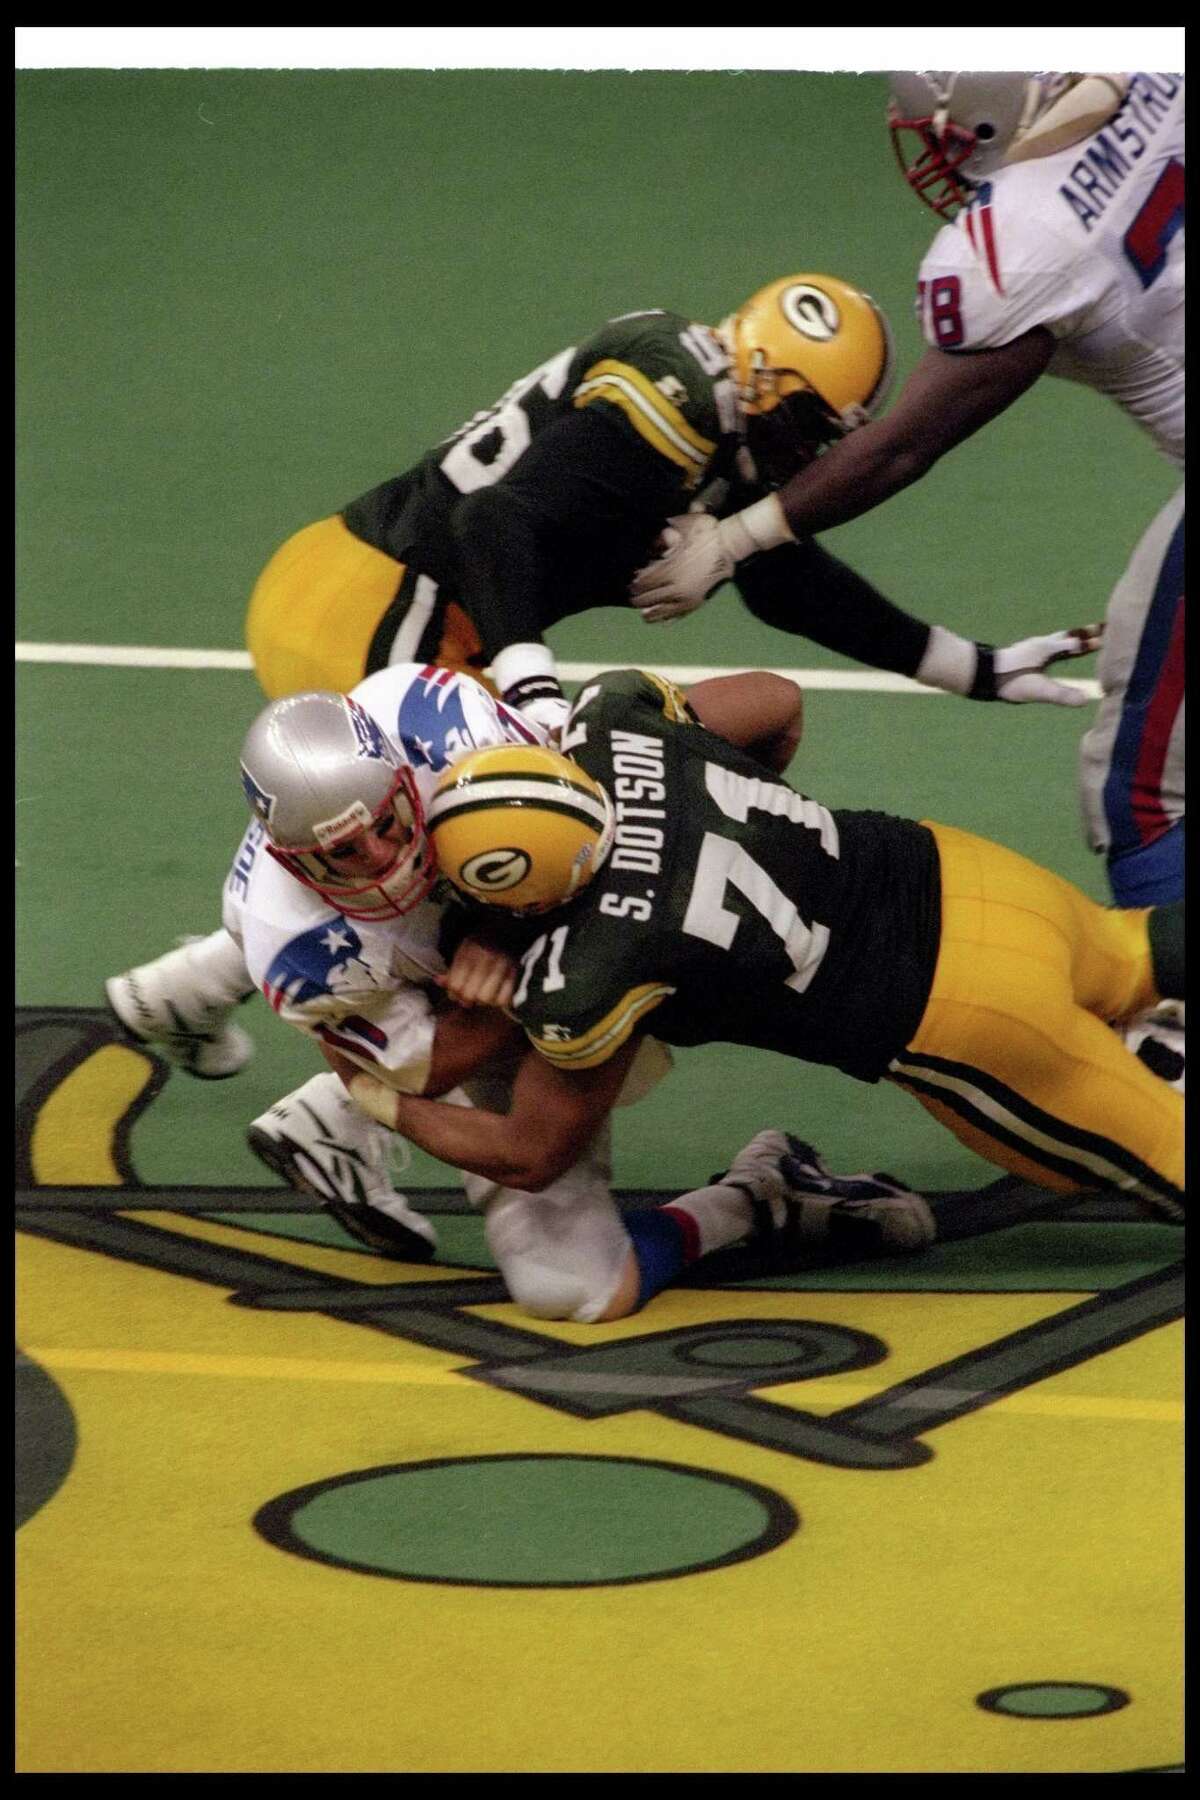 Packers lineman Santana Dotson sacks Patriots quarterback Drew Bledsoe in Green Bay's 35-21 victory in Super Bowl XXXI at the Superdome in New Orleans.